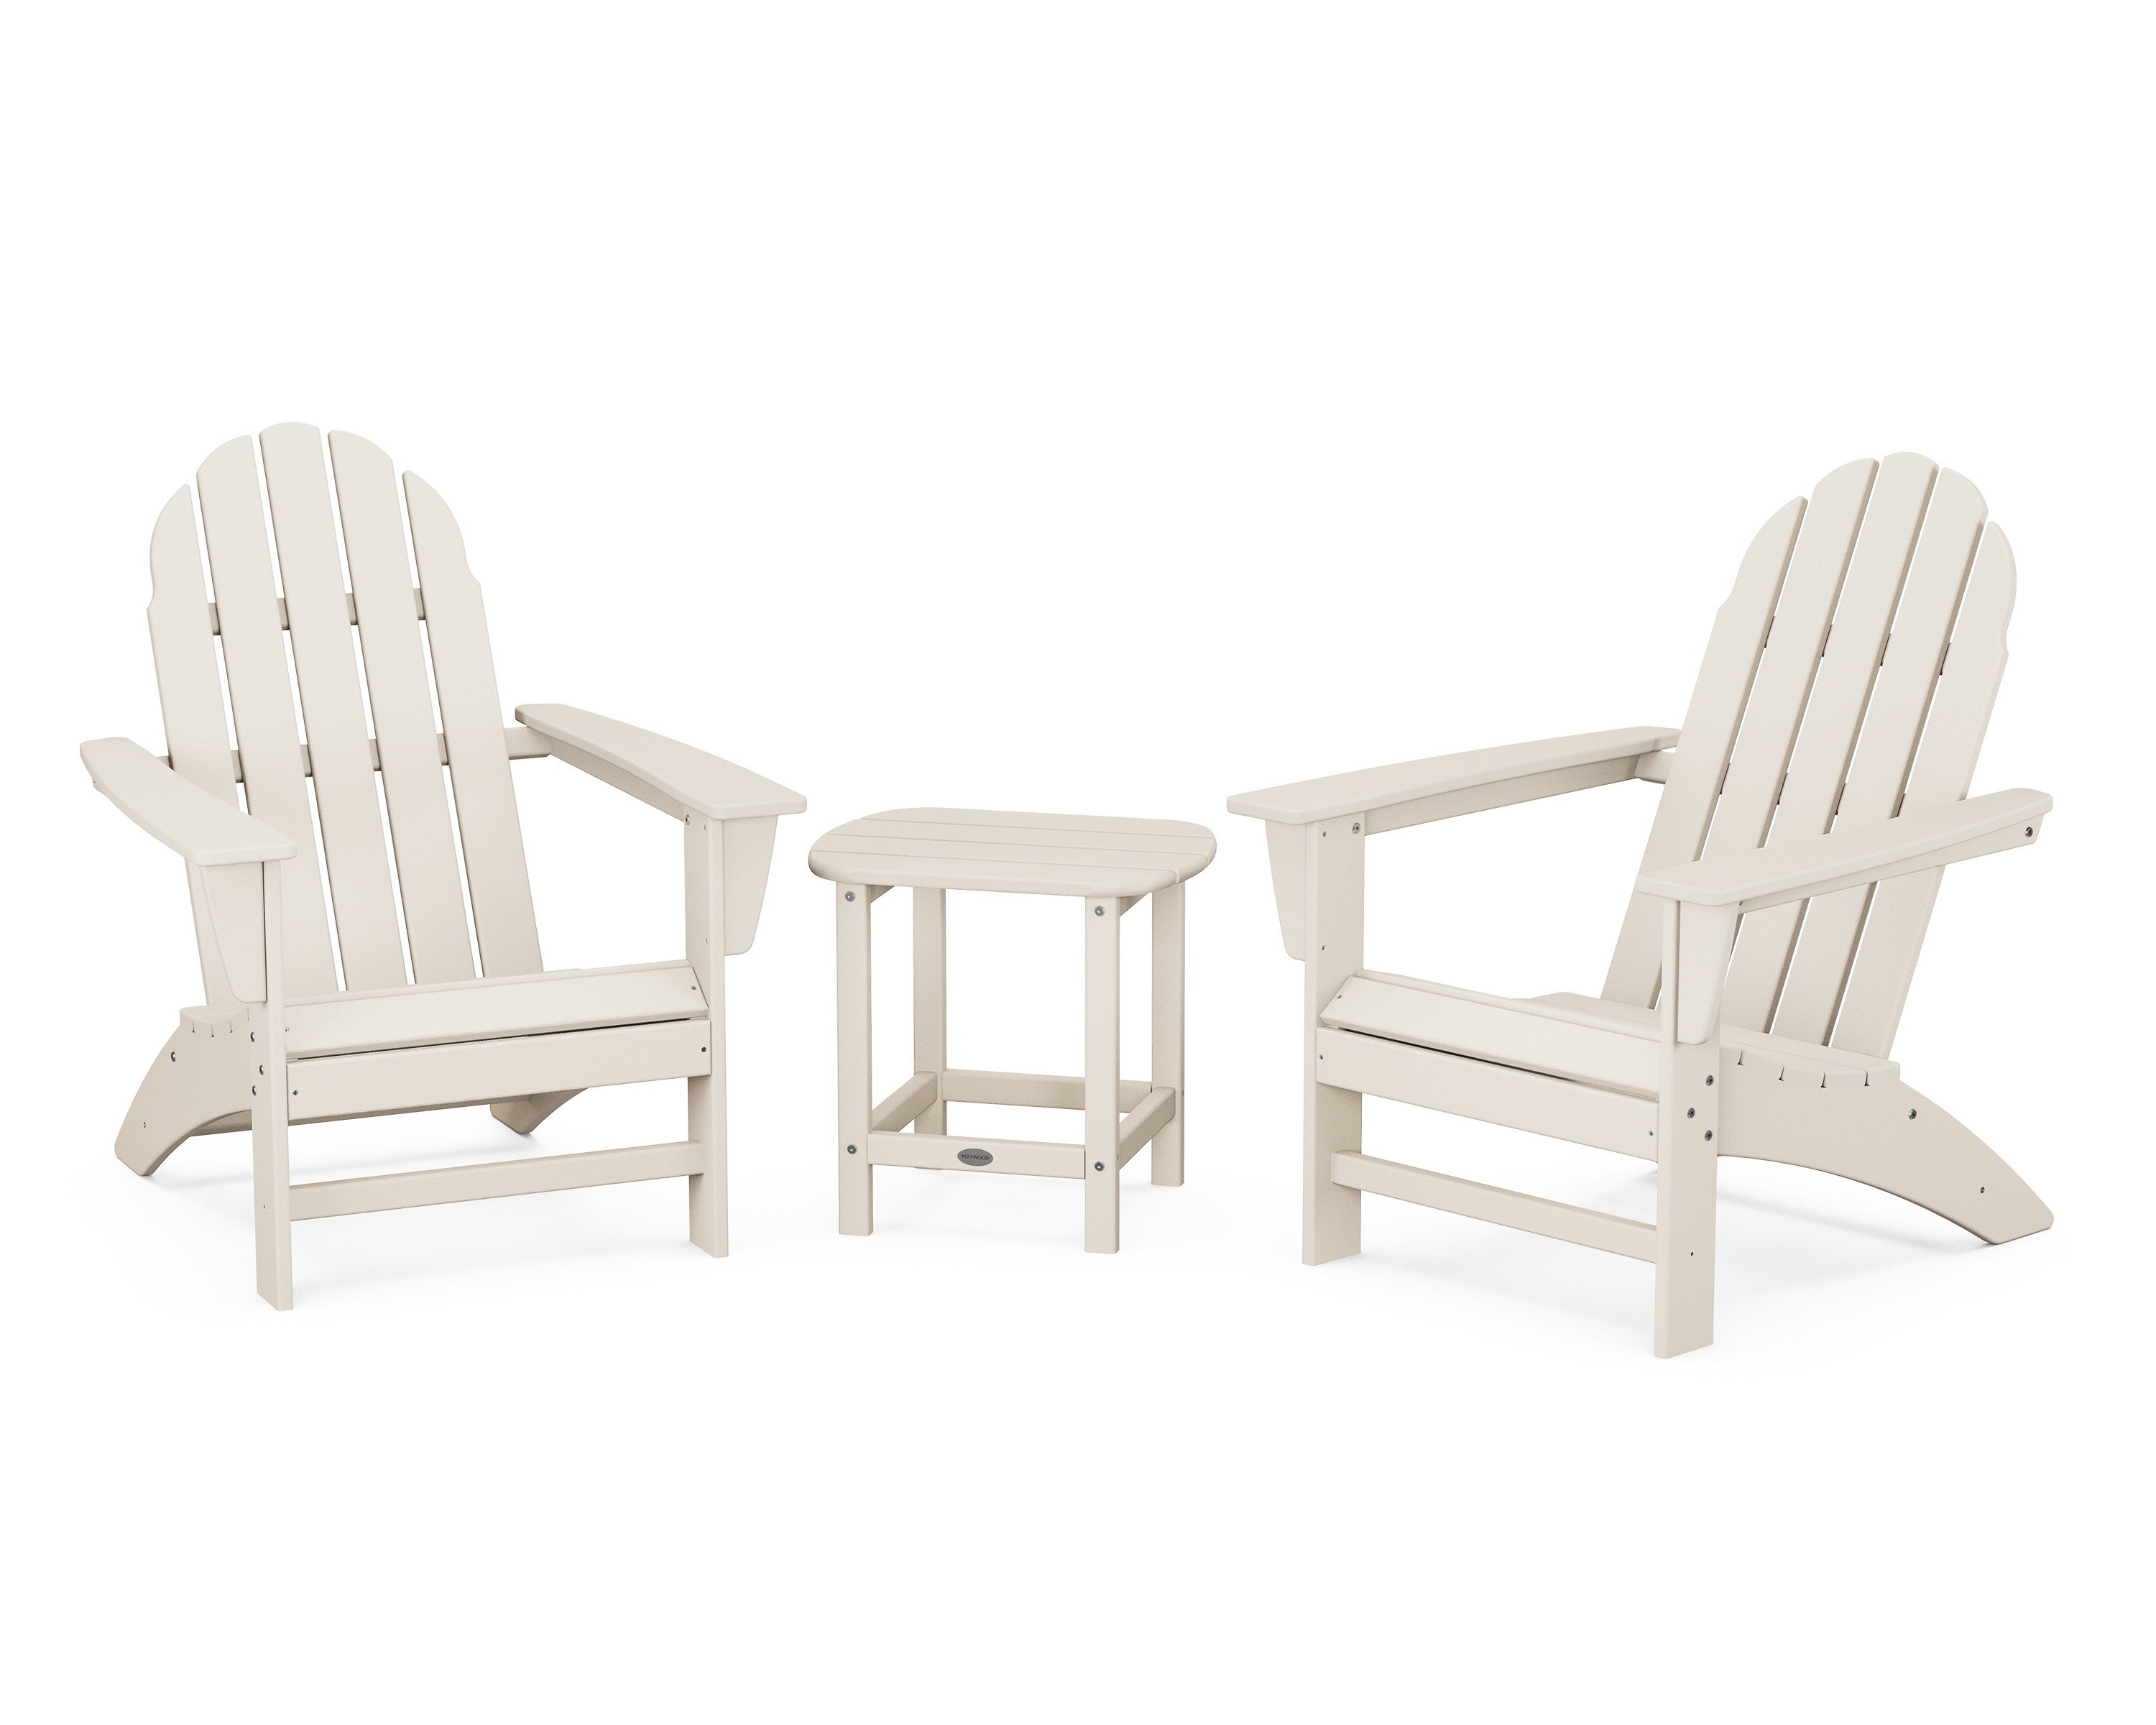 POLYWOOD Vineyard 3-Piece Adirondack Set with South Beach 18" Side Table in Sand - image 1 of 1